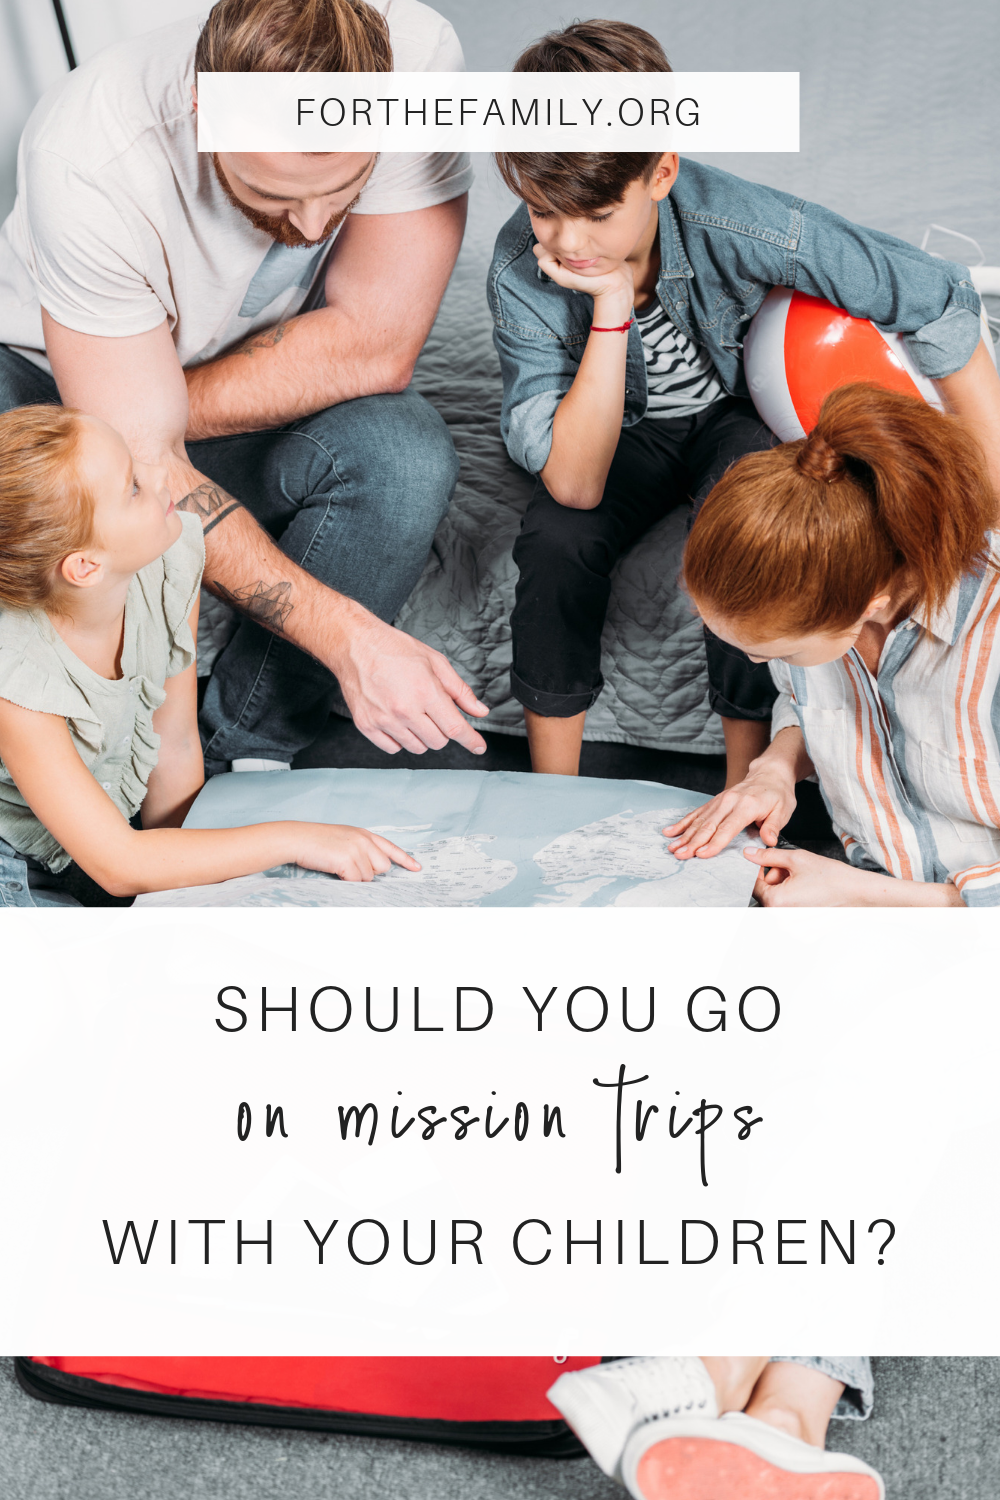 Have you ever thought of going on a mission trip with your children? You may think this way of serving is reserved only for adults, but today, we’re learning how missions and ministry can play an important part in the development of our kids.